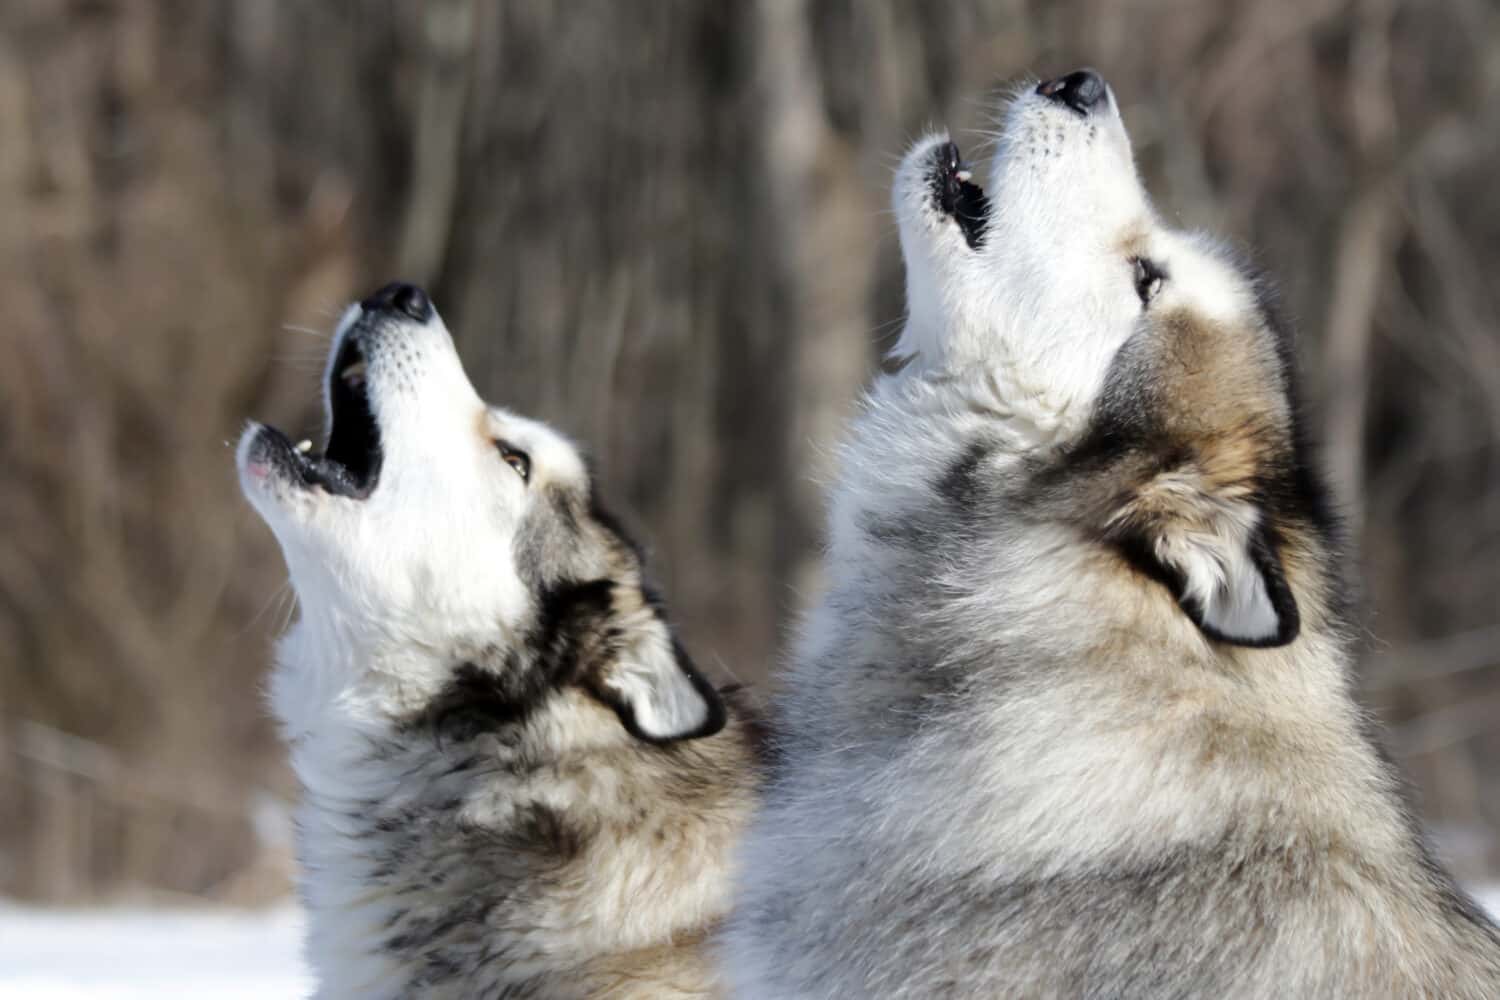 Alaskan Malamutes howling together in front of trees in the winter